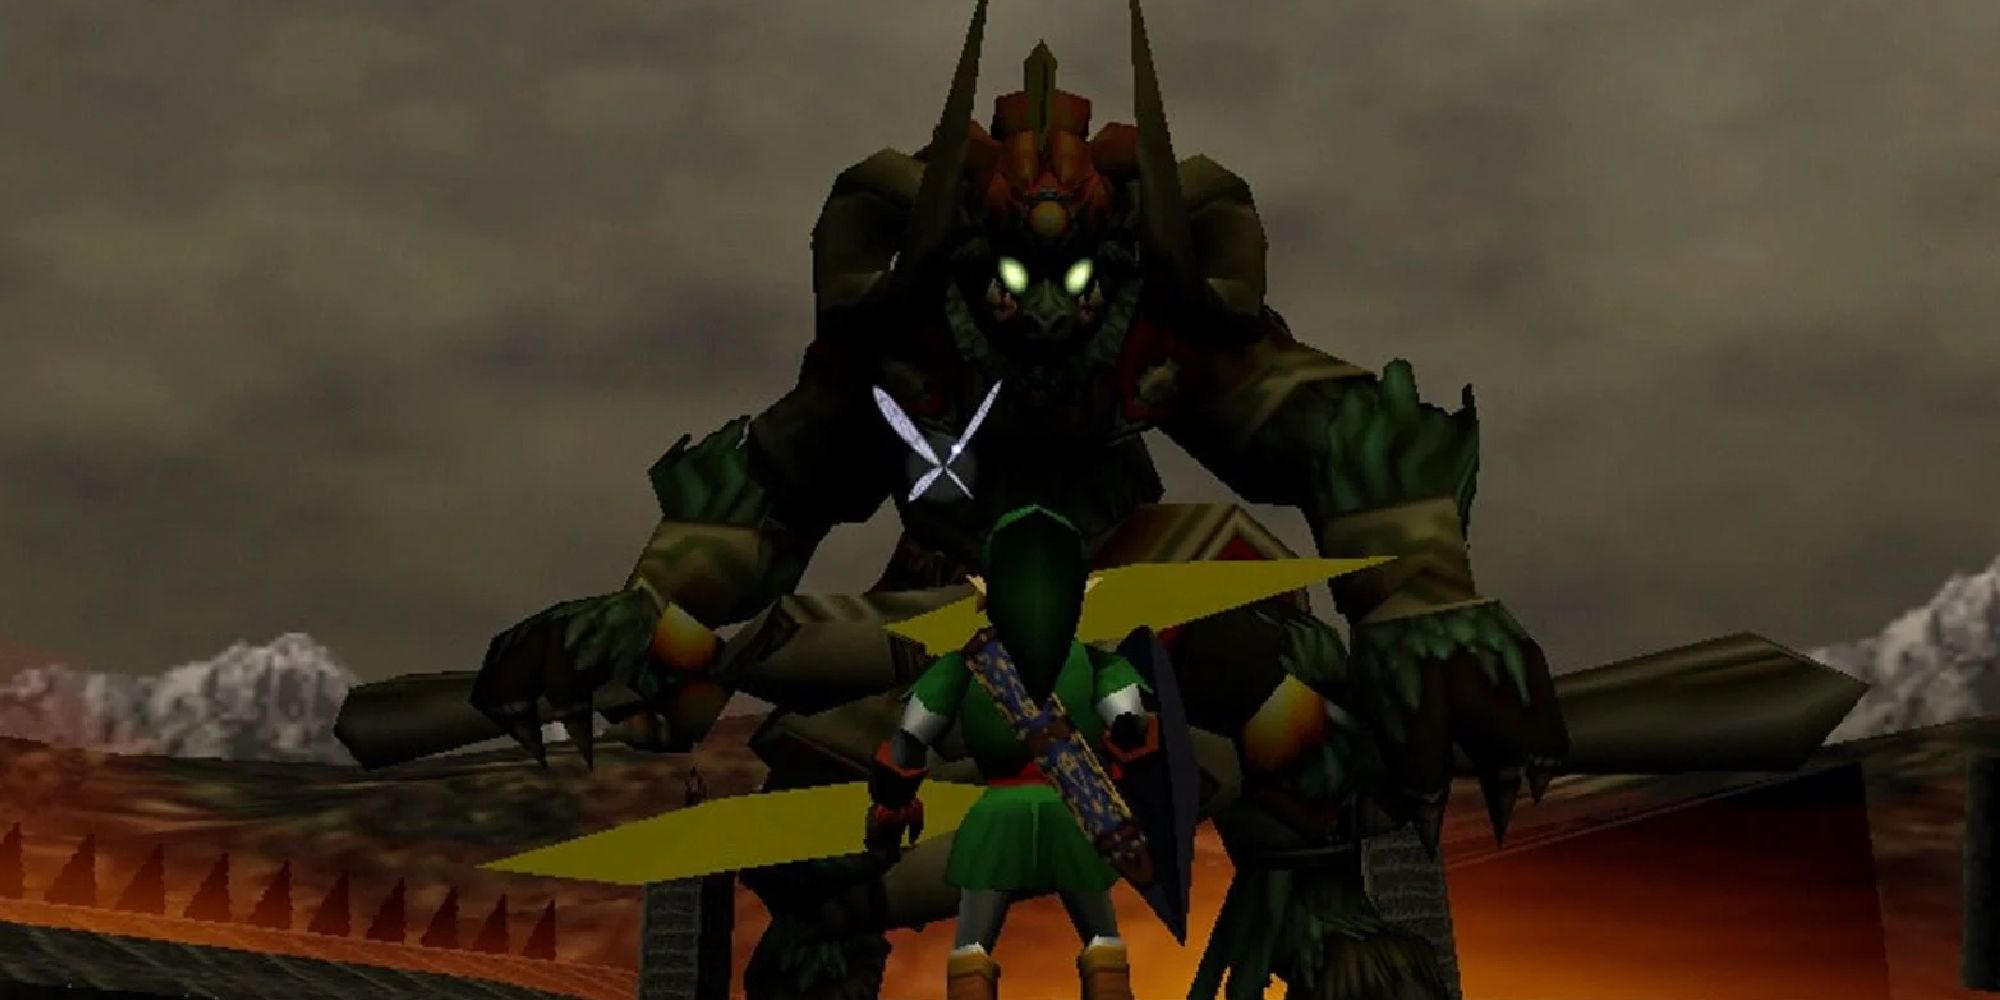 Link and Navi standing before Demon King Ganon at the end of Ocarina of Time